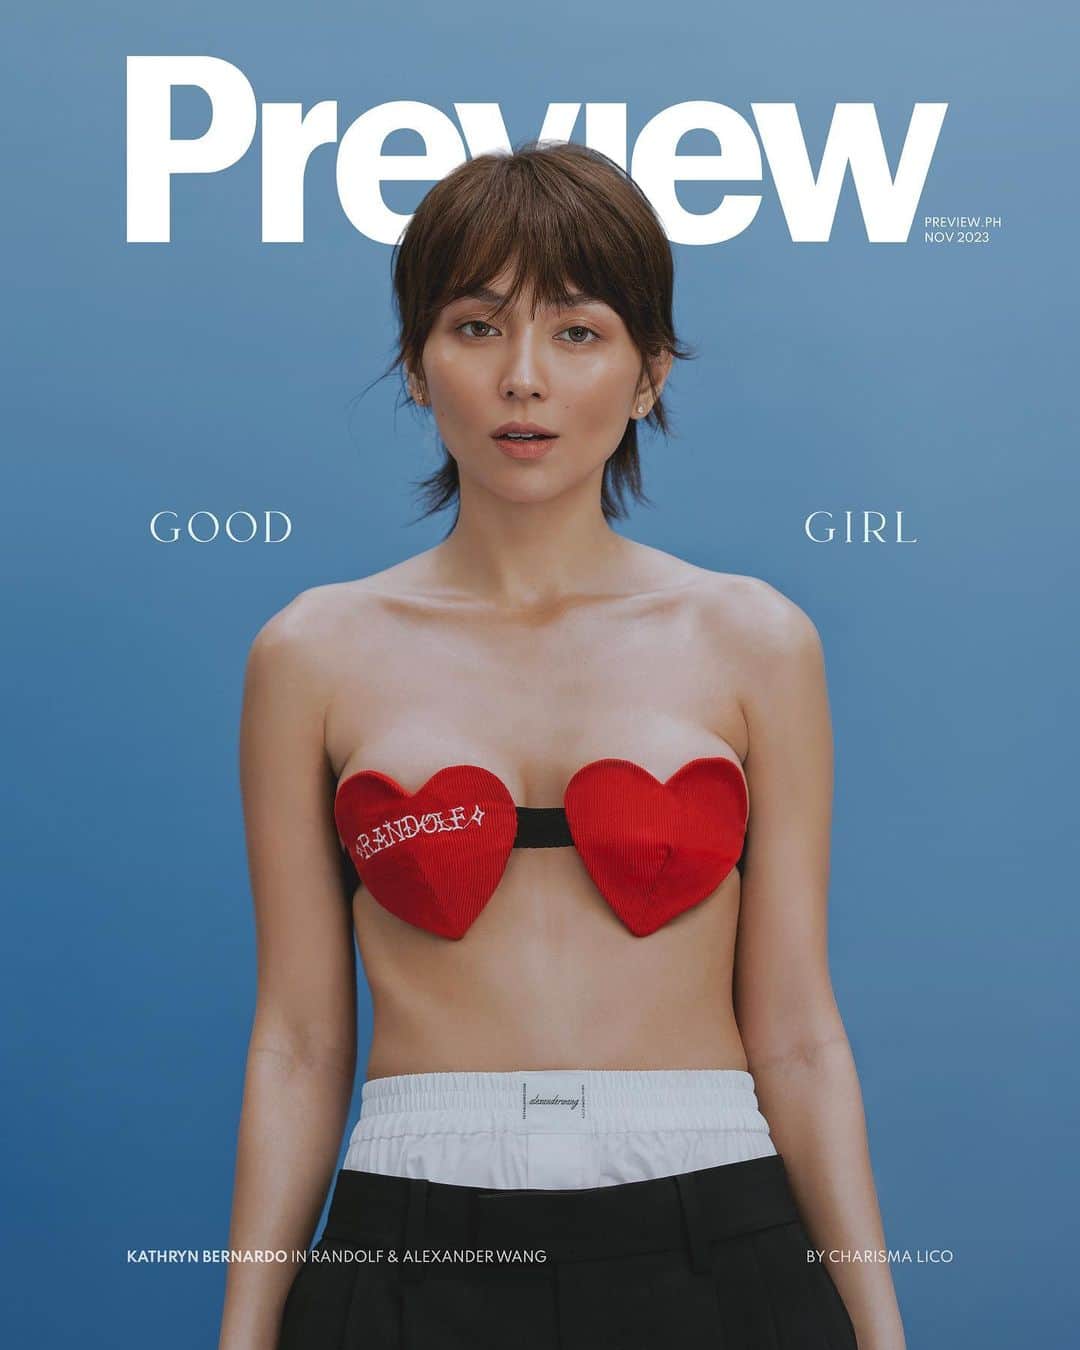 Kathryn Bernardoのインスタグラム：「In the wake of a much-lauded performance in “A Very Good Girl,” @bernardokath reflects back on her 20-year acting career, and why she was never afraid to experiment–even in the very beginning.  Read the full cover story in our link in bio. #PreviewLovesKathryn #PreviewXKathryn  Kathryn wears a bra by @randolfclothing, shorts by @alexanderwangny from @univers.ph Greenbelt 3, and earrings by @vjewelryofficial.  Produced and Styled by The Preview Team Photographer: @charismalico Creative Director: @bacsarcebal Editor-in-Chief: @itsmarjramos Production: @katfromjupiter and @heyrocketgirl Fashion: @itsmarjramos, @heyrocketgirl, @lkmglz, and @ishafojas Makeup: @owensarmiento Hairstyling: johnvalle20 using @jhen_hairextensions Set Design: @pauljatayna.proj, assisted by @paomendoza._ Story: @katfromjupiter Videos: @janajodloman Social Media: @itsjamiebriones Shoot Location: @balaracontenthouse Special thanks to @celine.mallari of @univers.ph Greenbelt 3」